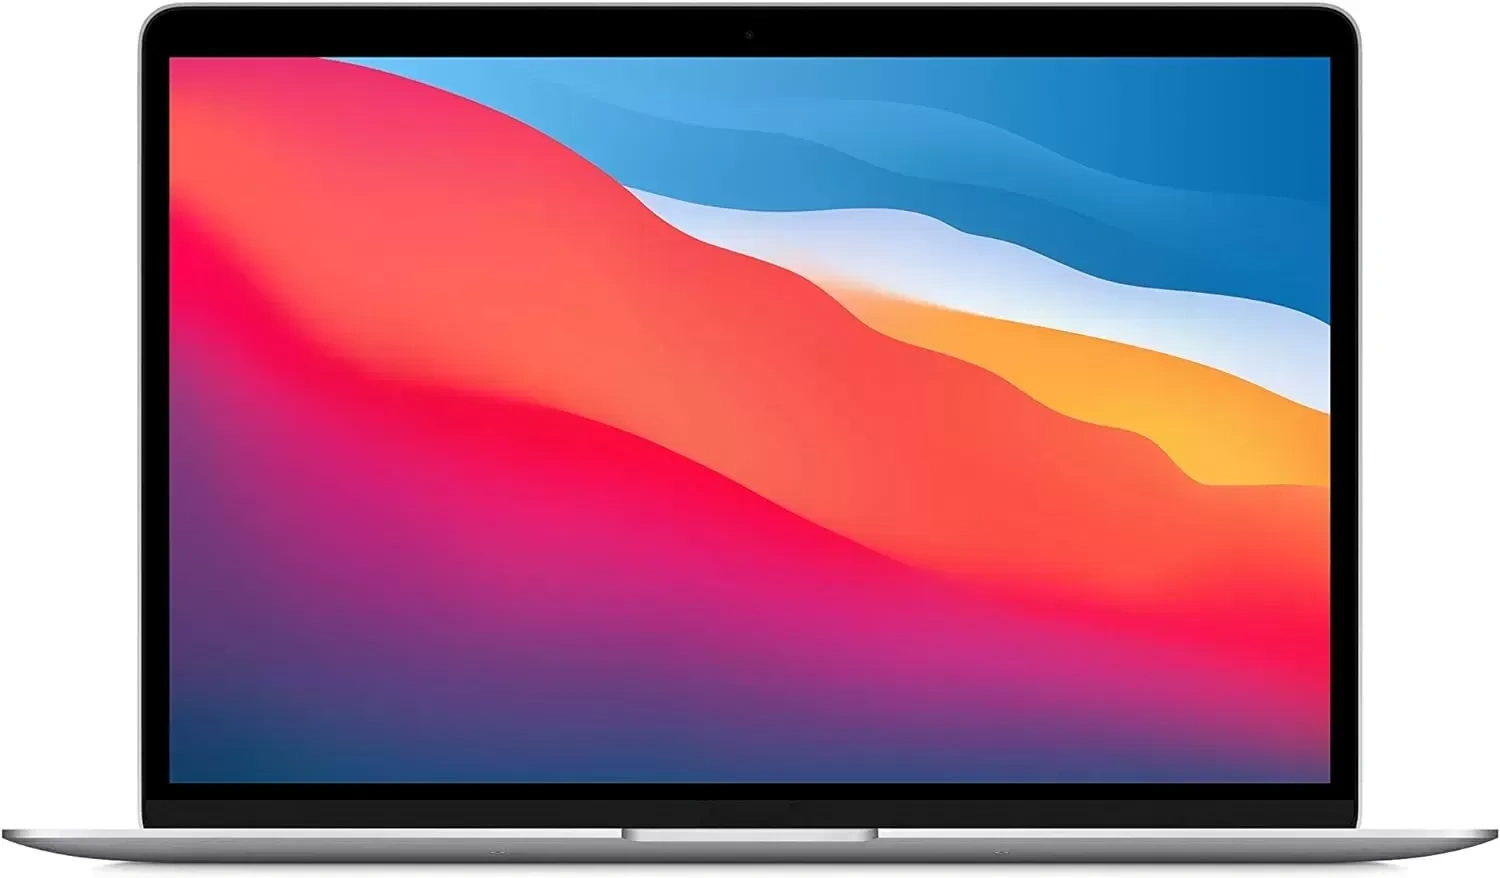 Apple 2020 MacBook Air Laptop M1 Chip, 13” Retina Display, 16GB RAM,Backlit Keyboard, FaceTime HD Camera, Touch ID. Works with iPhone/iPad